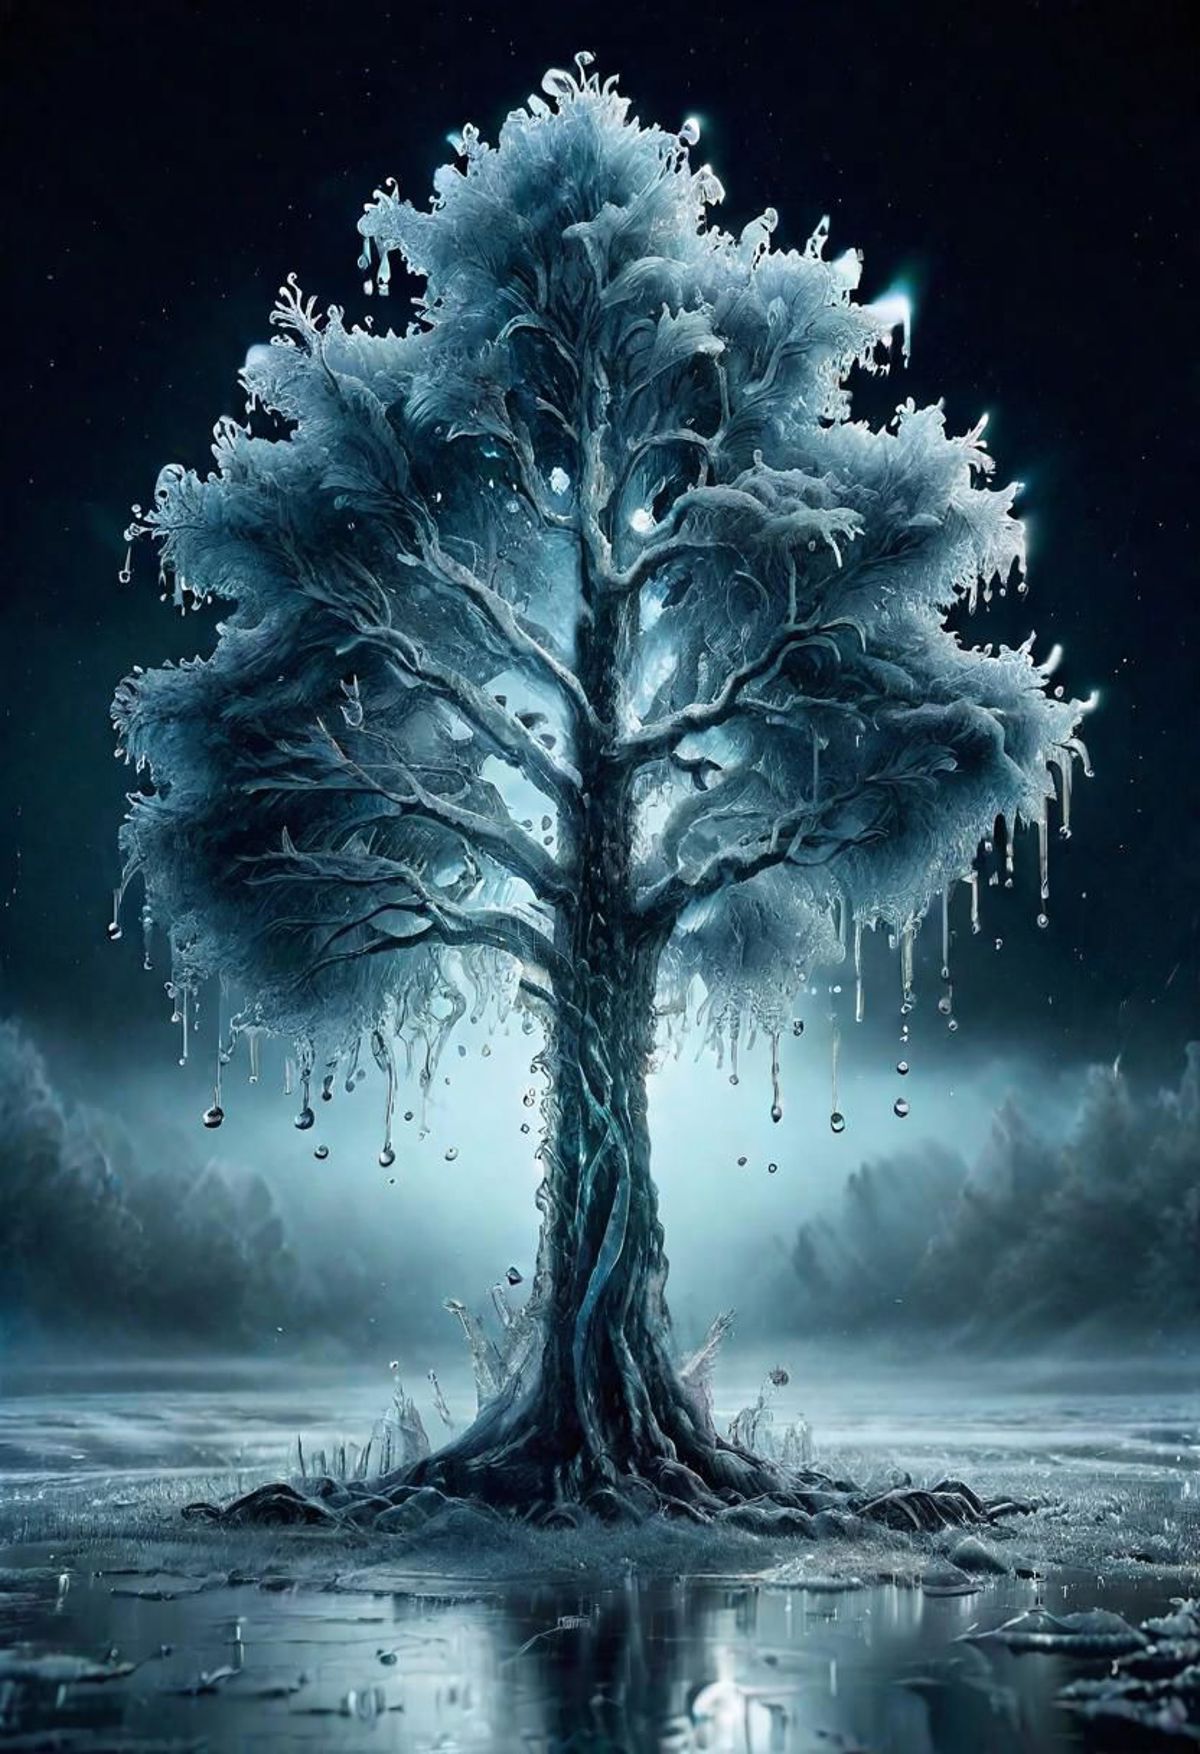 Frozen Tree with Icicles in a Dark Sky